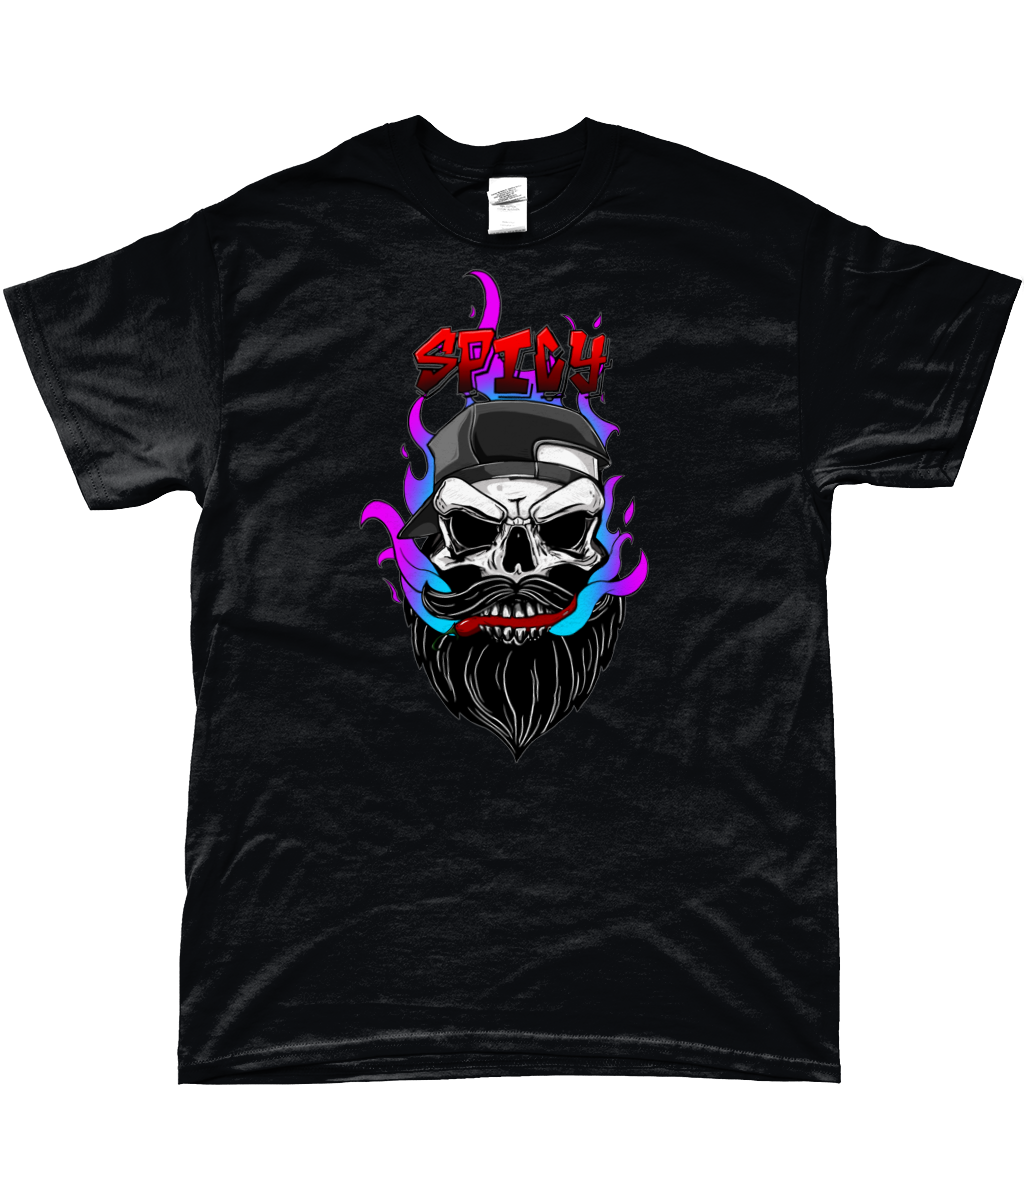 The Bropher's Grimm Spicy Soft-Style T-Shirt